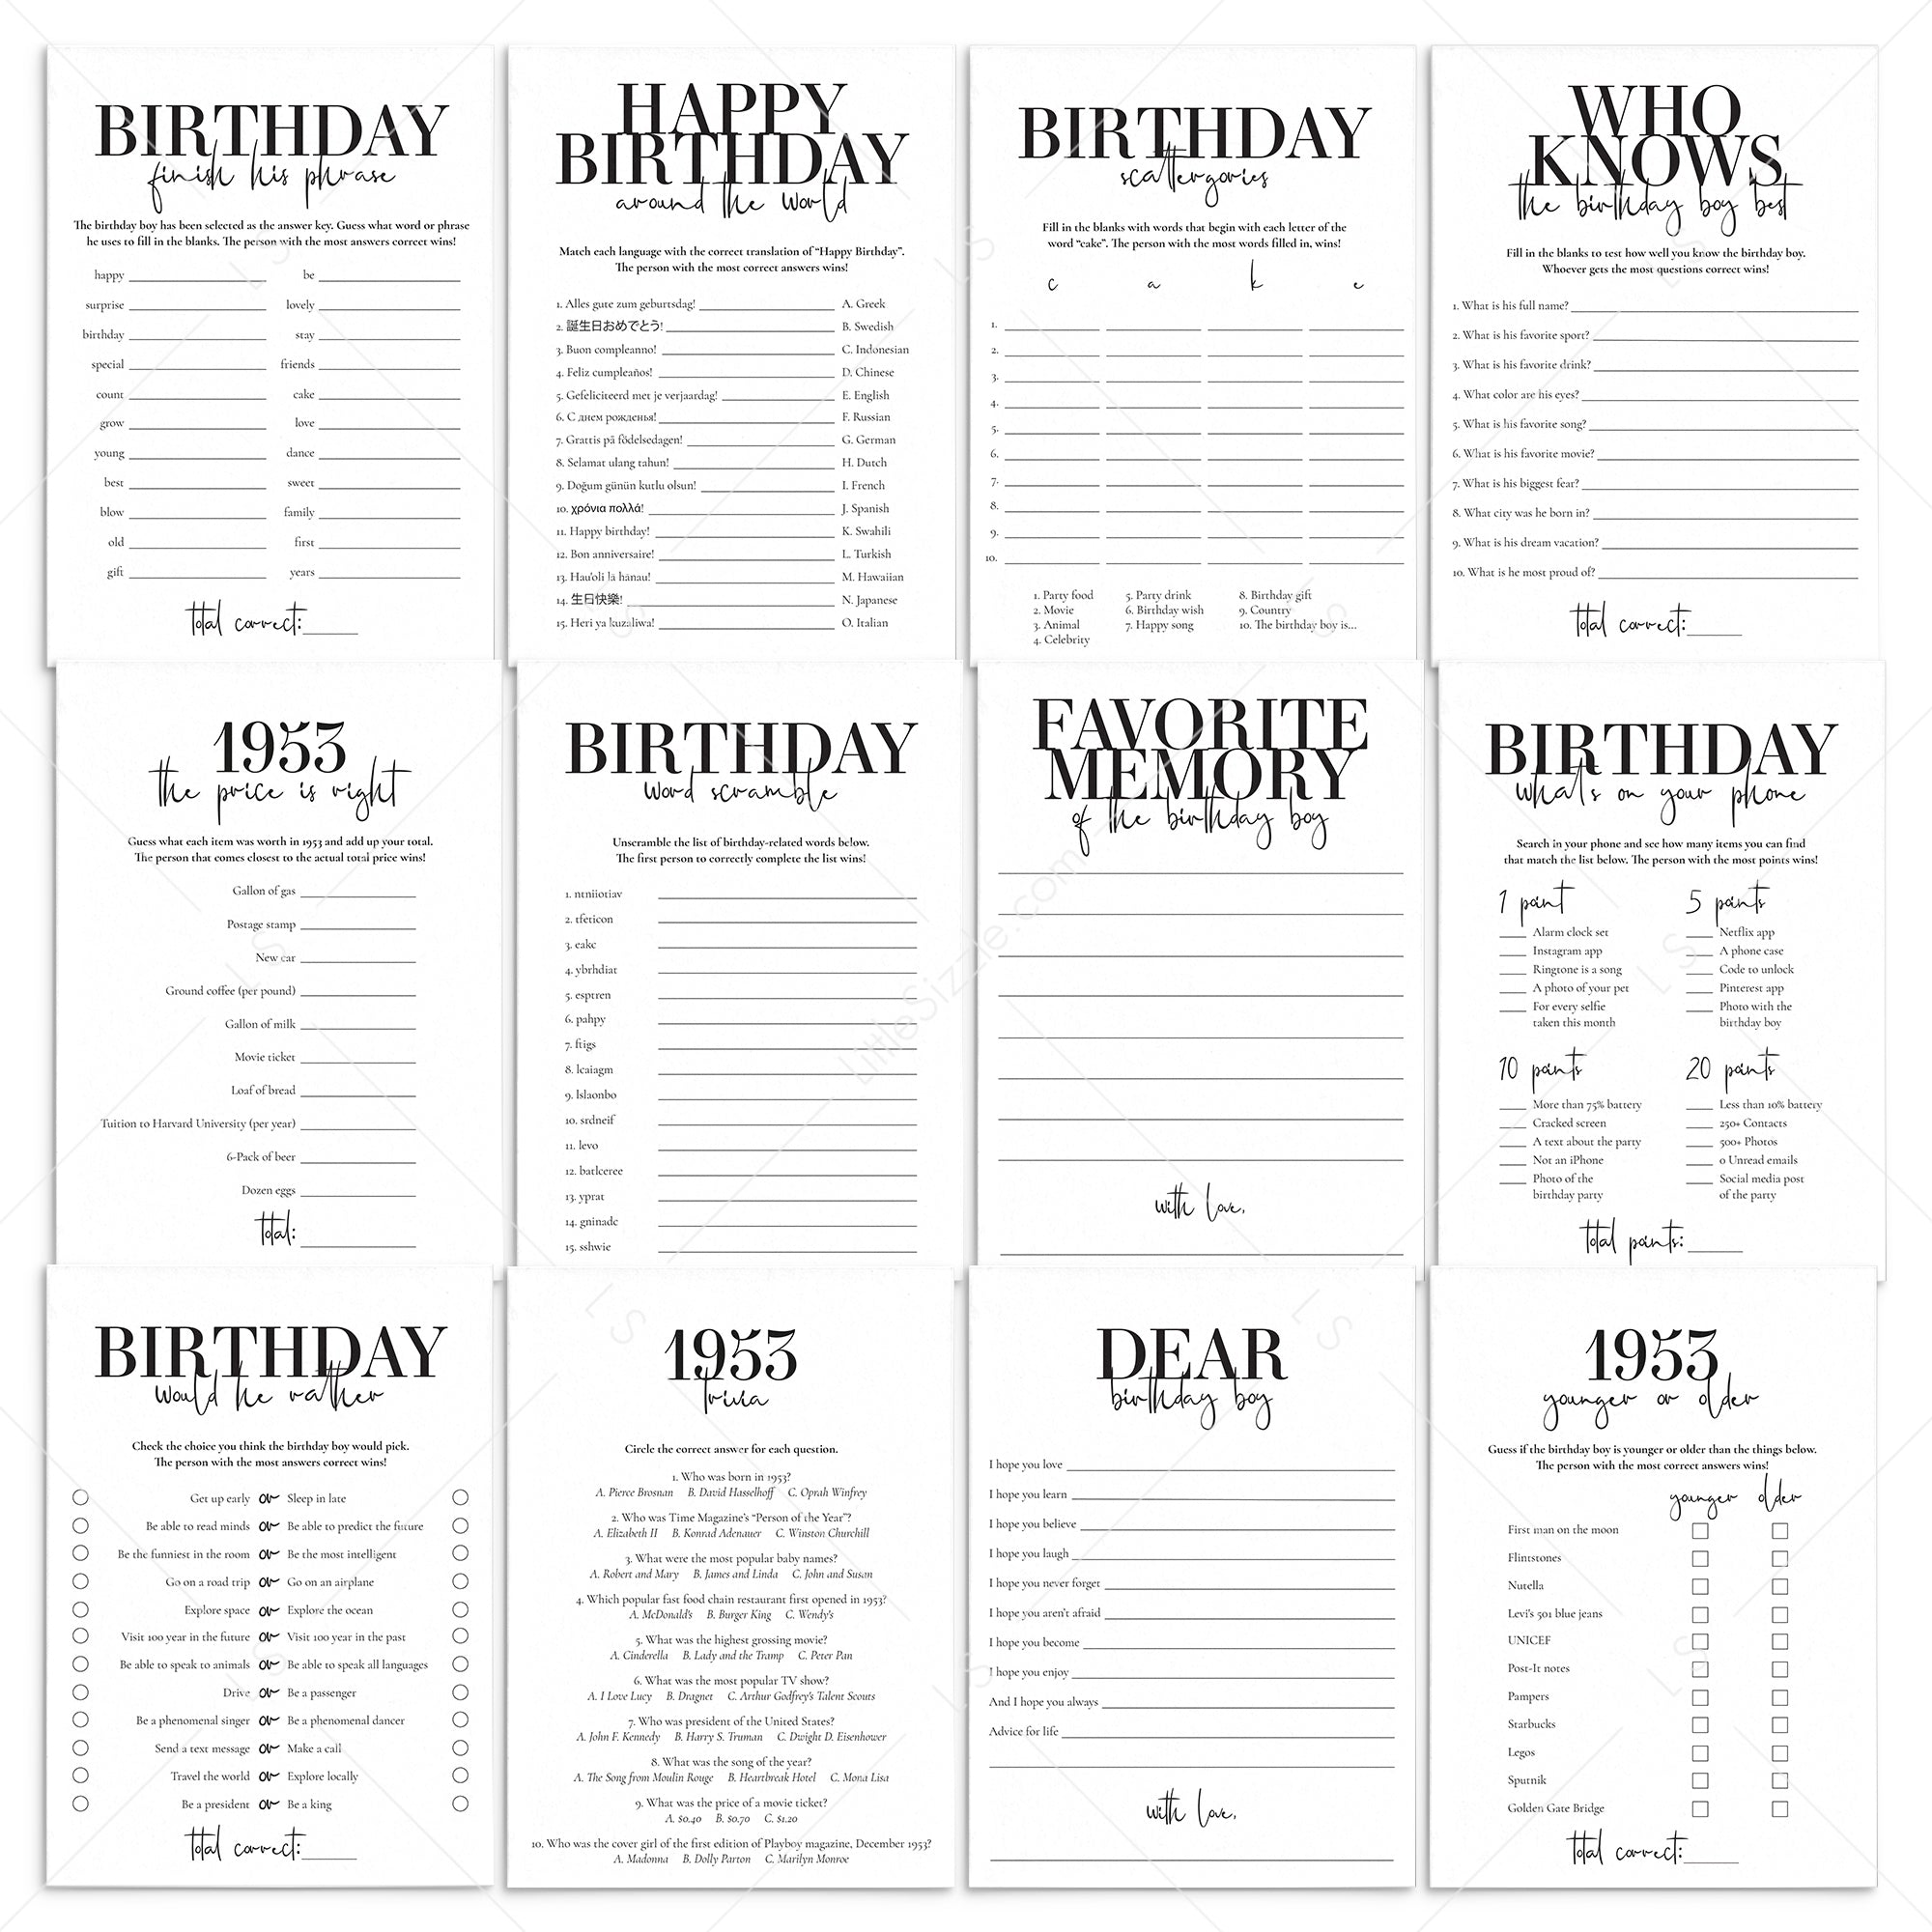 Born in 1953 70th Birthday Party Games Bundle For Men by LittleSizzle